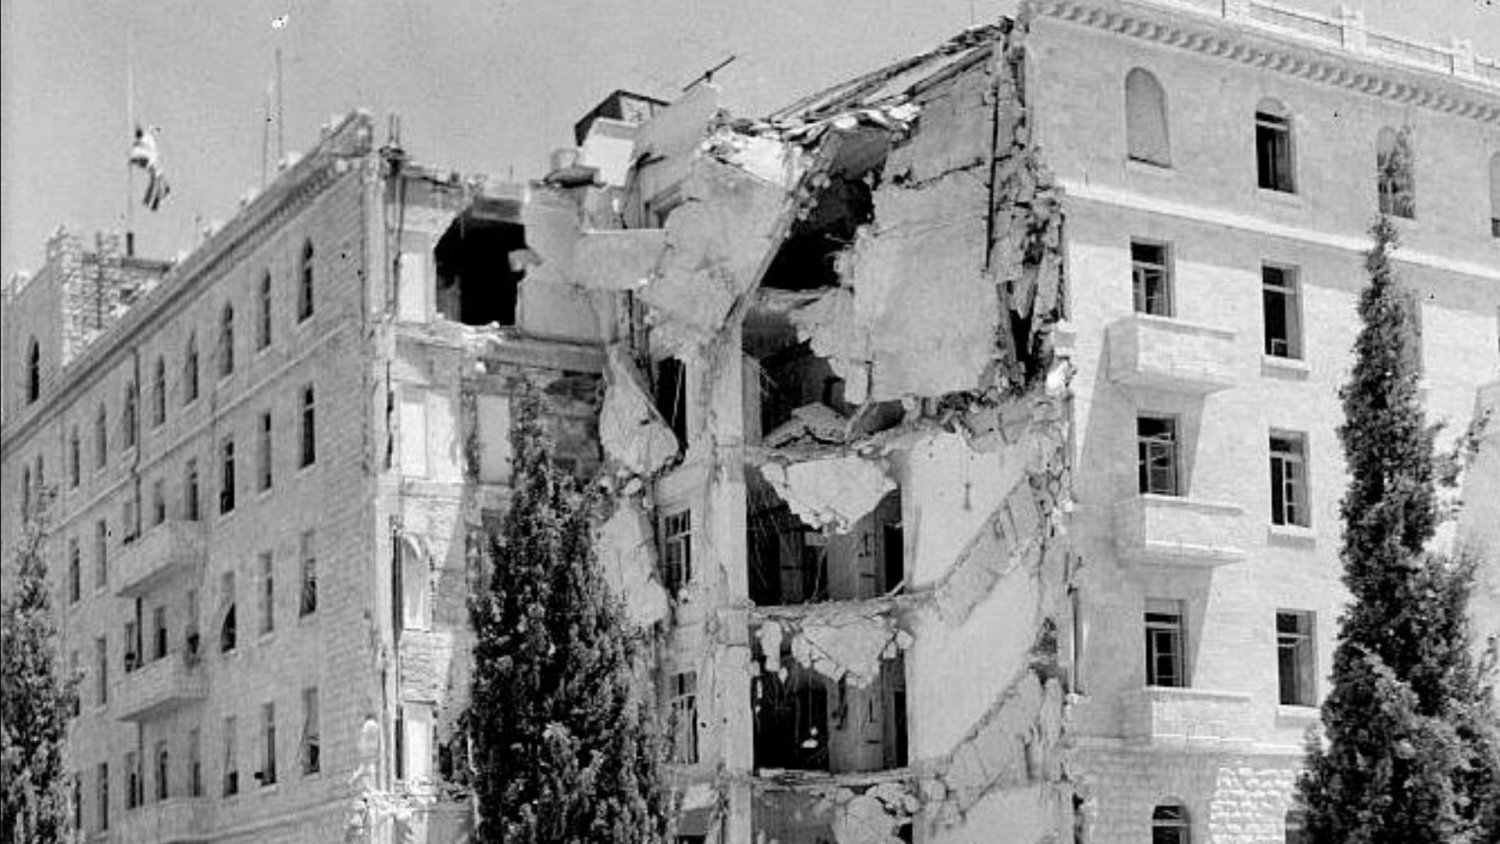 The King David Hotel after its bombing by Zionist forces, July 22, 1946